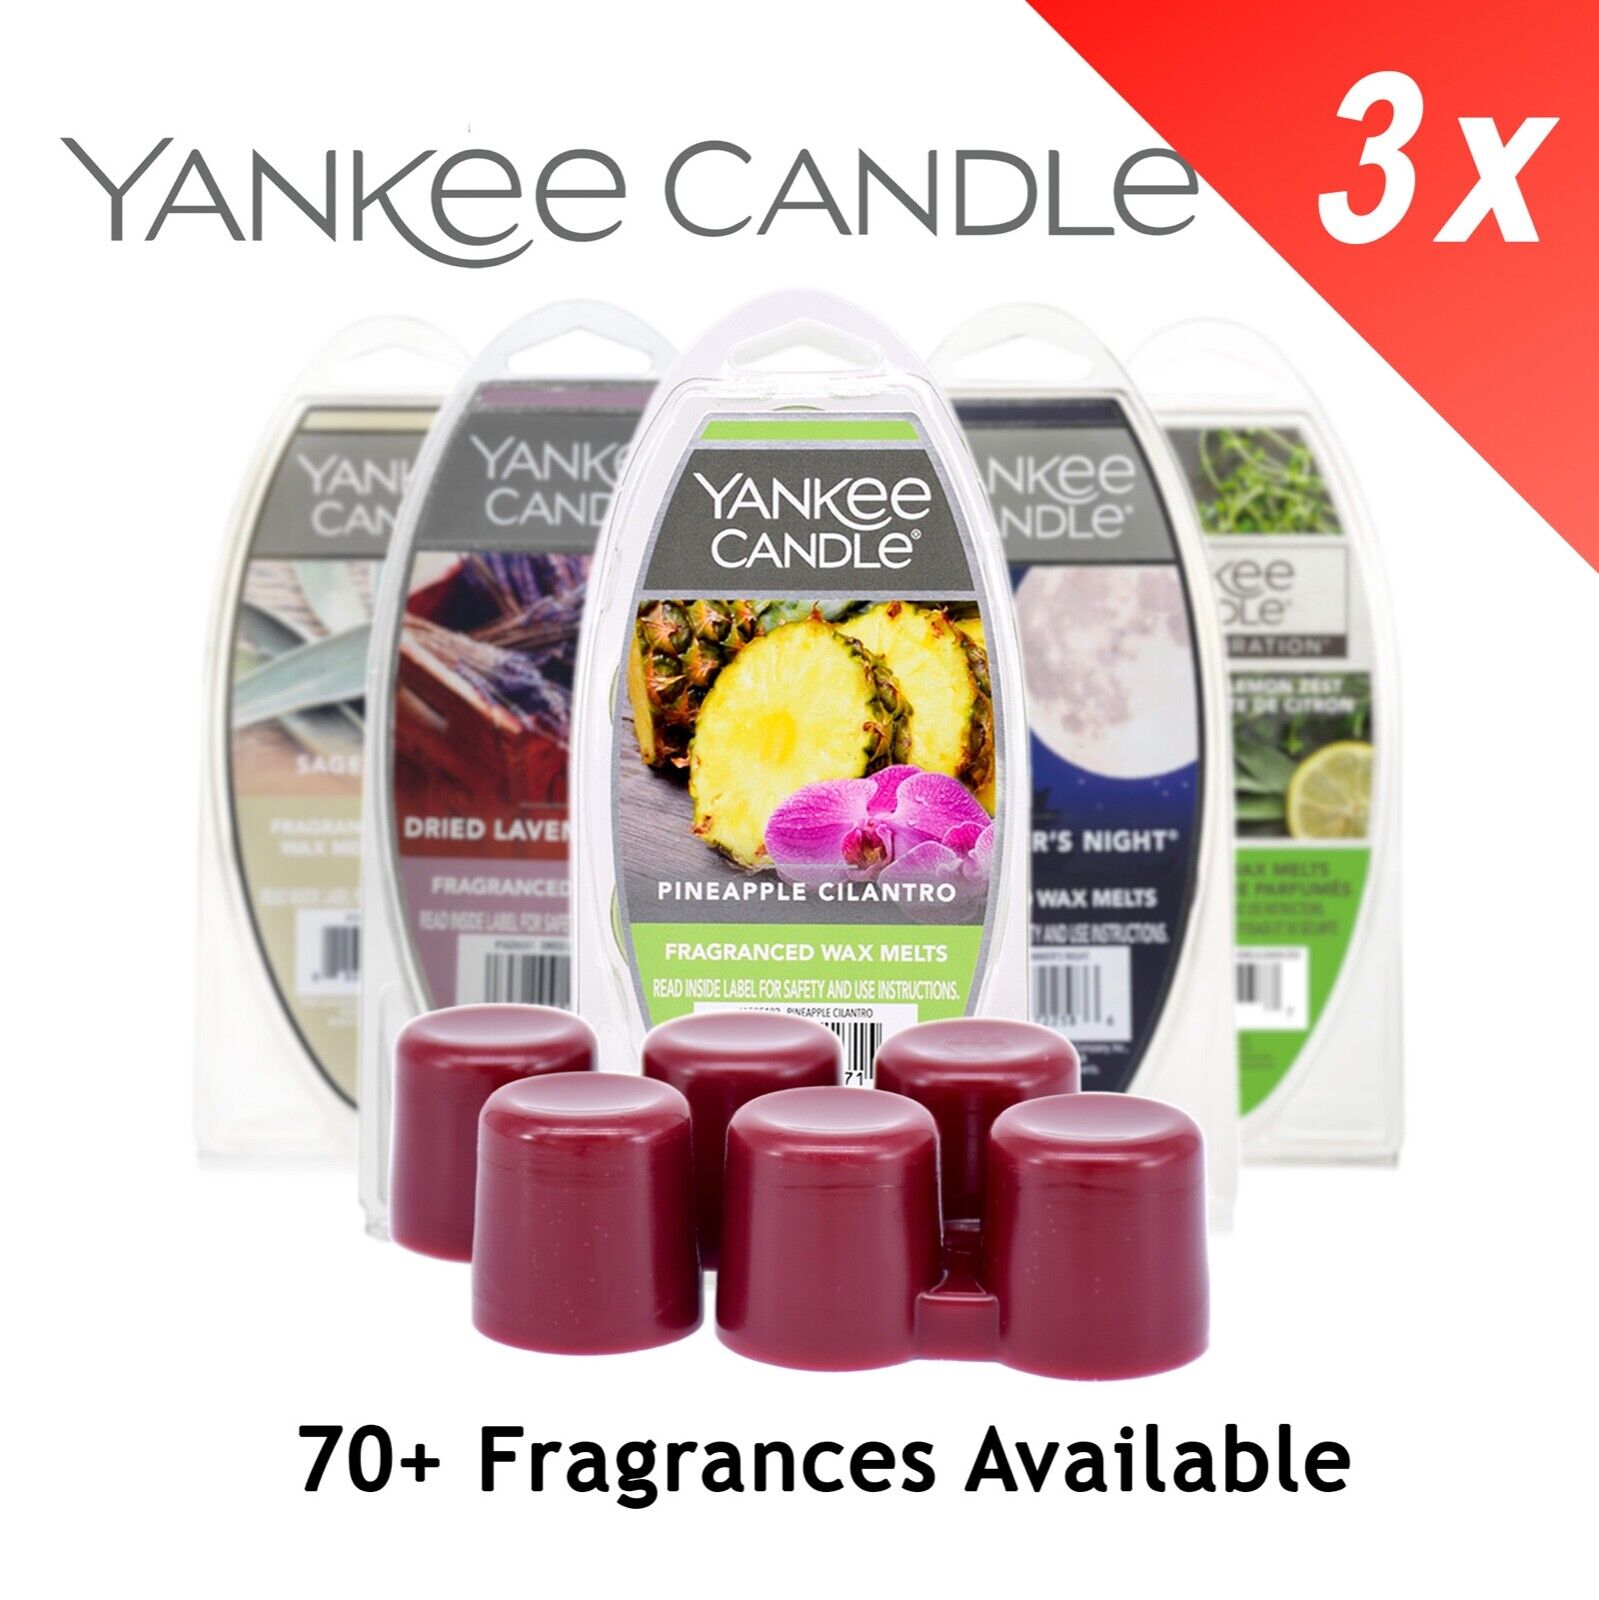  Yankee Candle Dried Lavender & Oak Fragranced Wax Melts : Home  & Kitchen